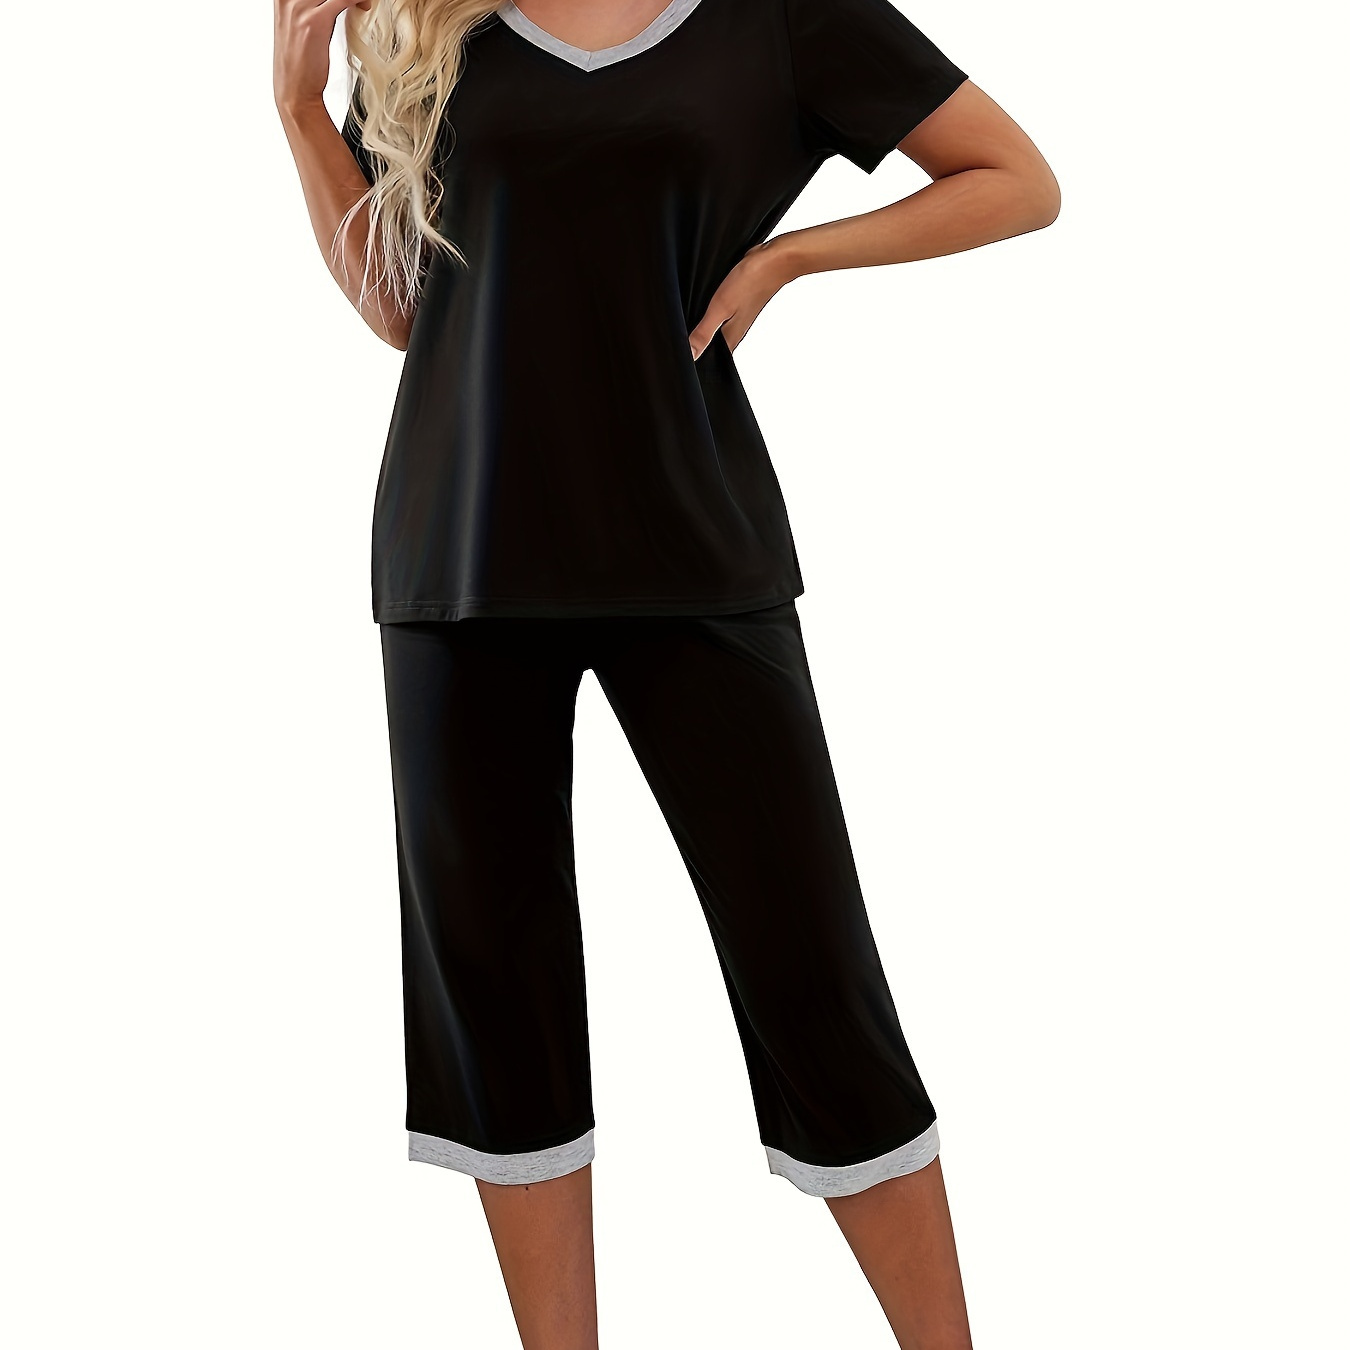 

Women's Colorblock Casual Lounge Set, Short Sleeve V Neck Top & Capri Pants, Comfortable Relaxed Fit